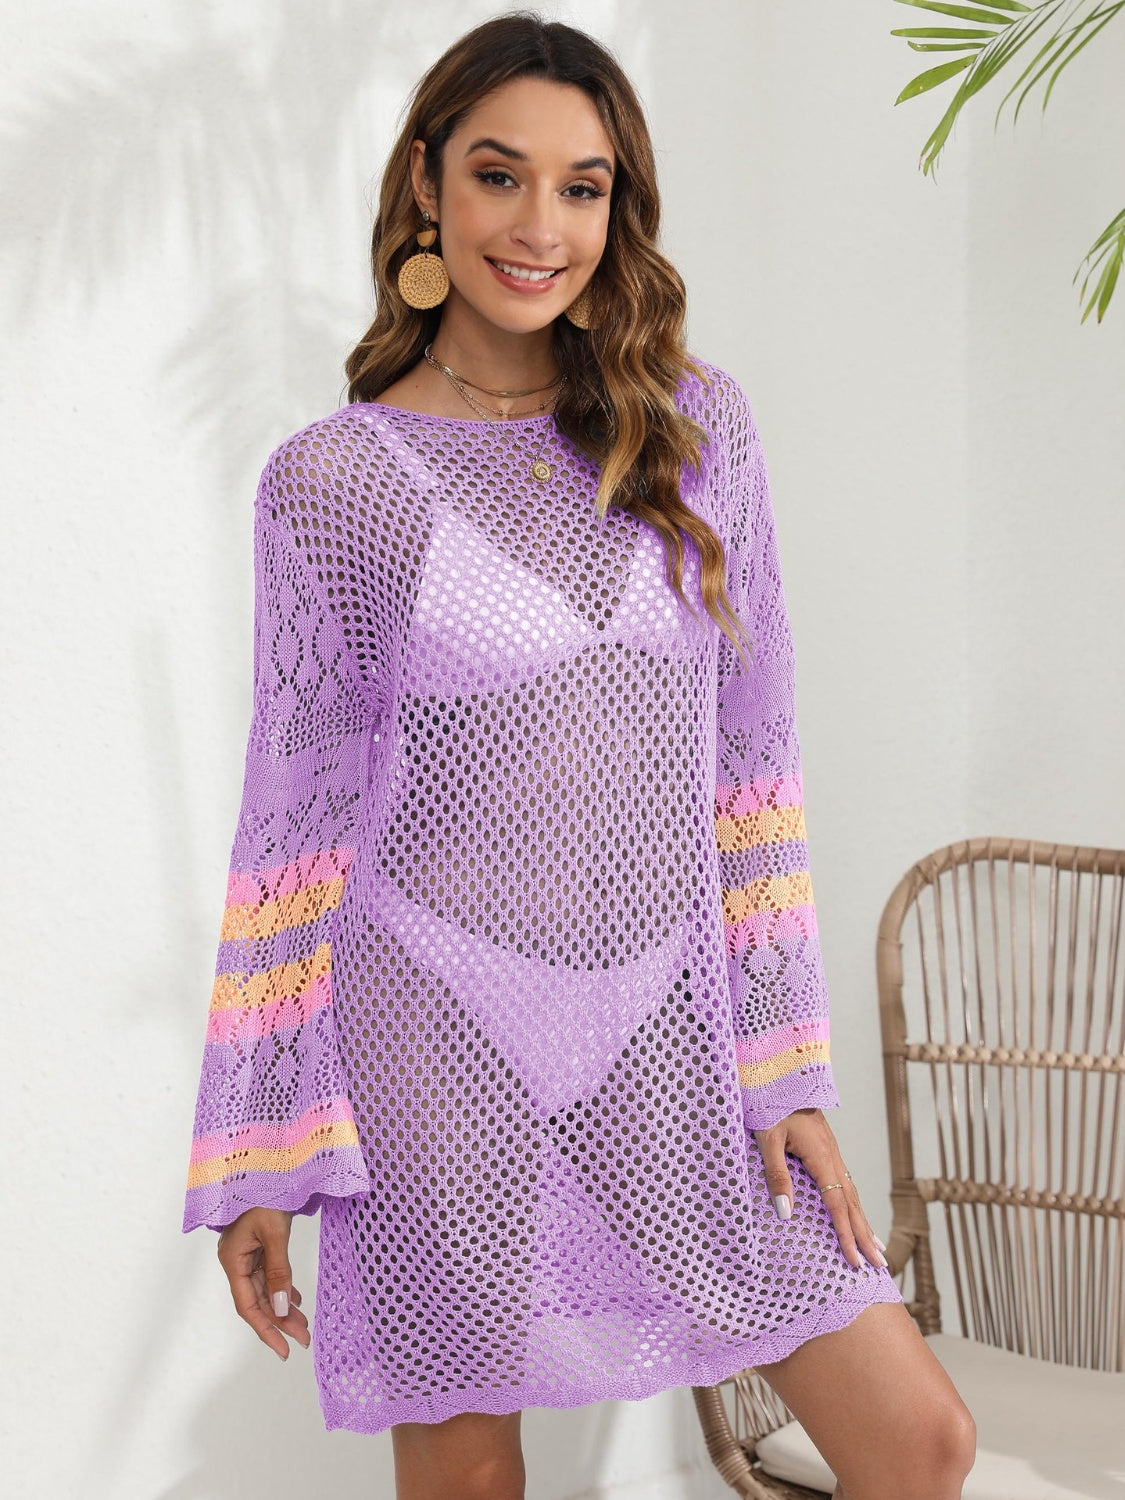 Sunset Vacation  Openwork Contrast Long Sleeve Cover-Up  Sunset and Swim Heliotrope Purple One Size 